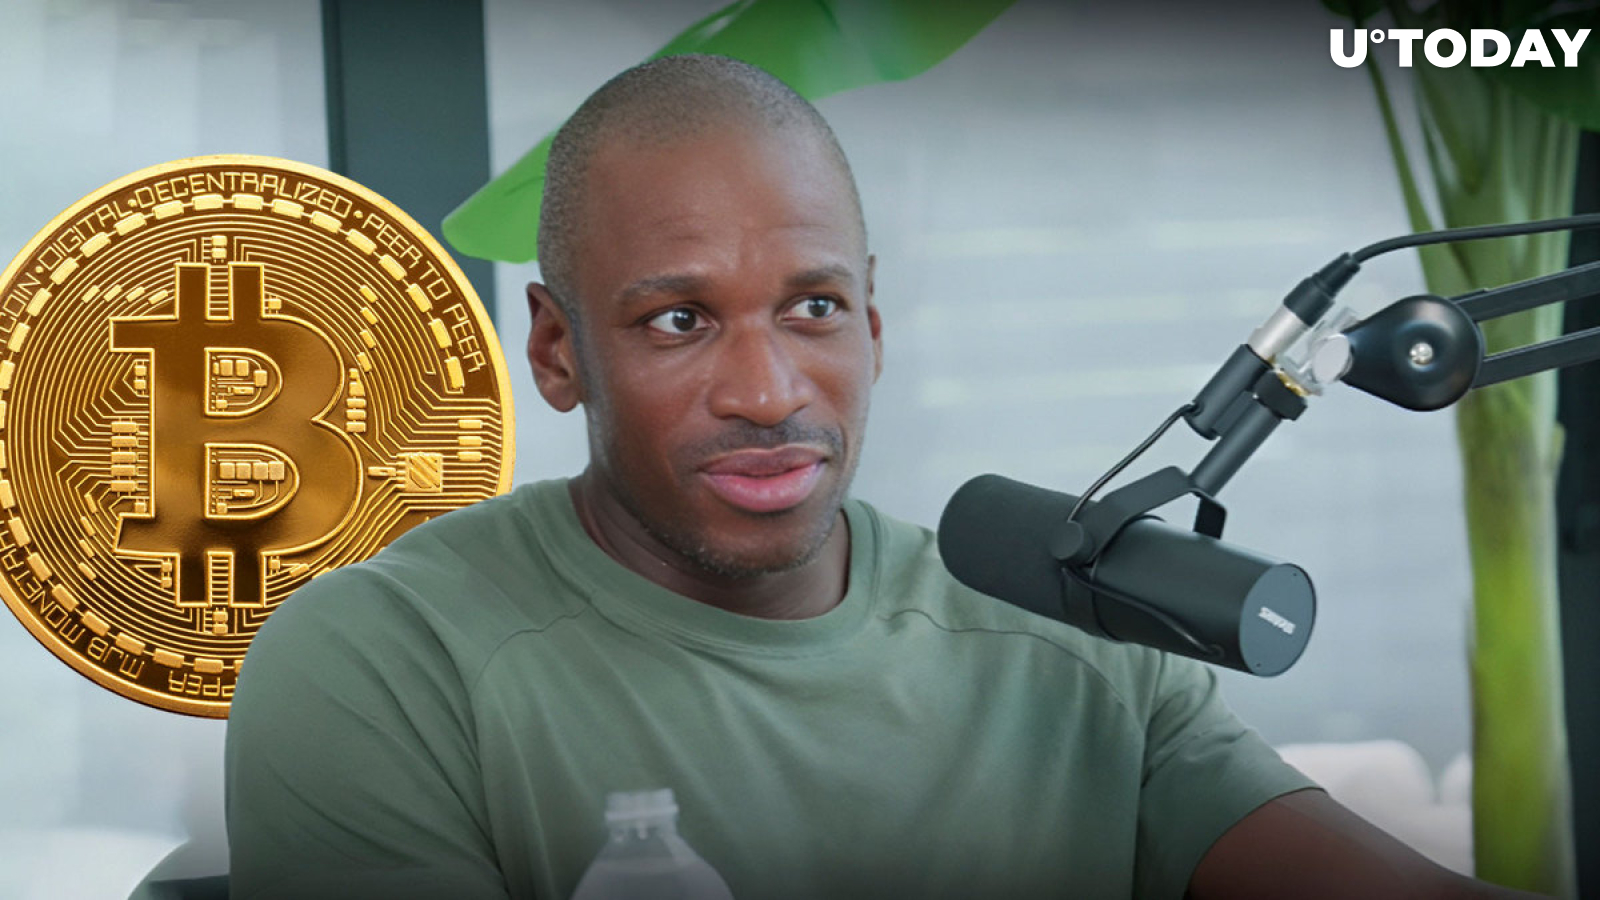 Bitcoin (BTC) to Reach $1 Million, Predicts Arthur Hayes With Cryptic Message